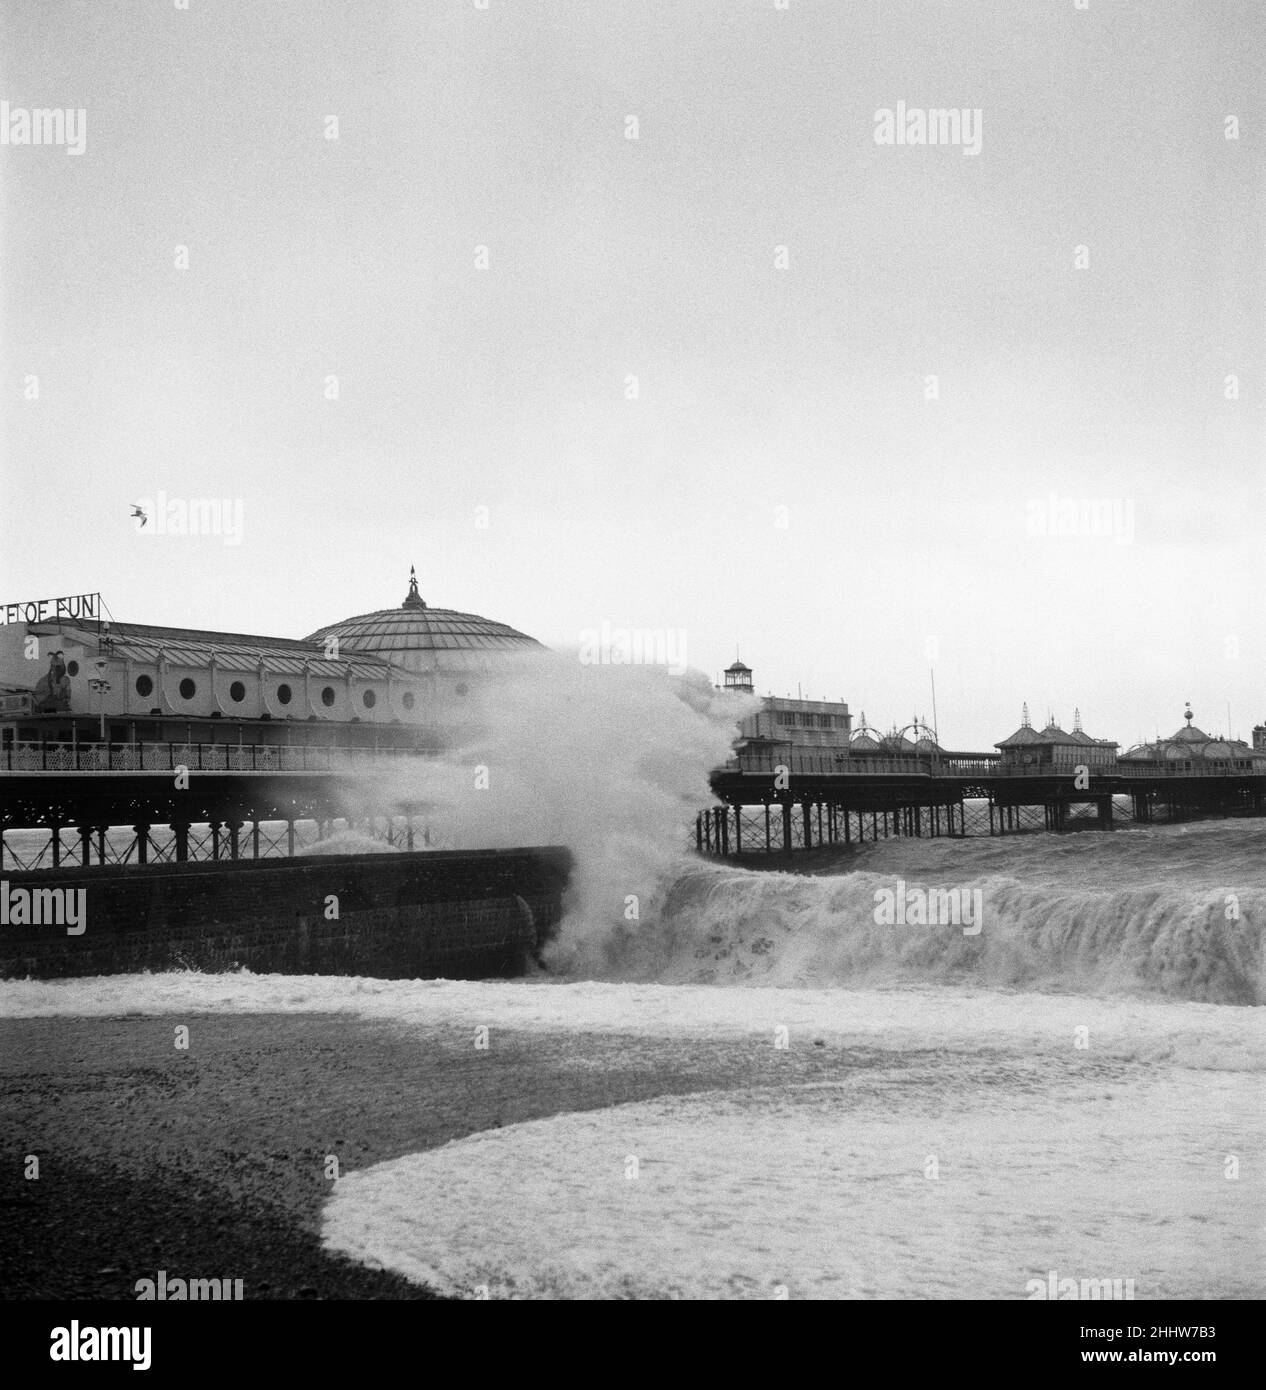 Gales at Brighton. A beautiful milky wave at Brighton, the pier can be seen in the background. Waves pounding the beach. 2nd May 1954. Stock Photo